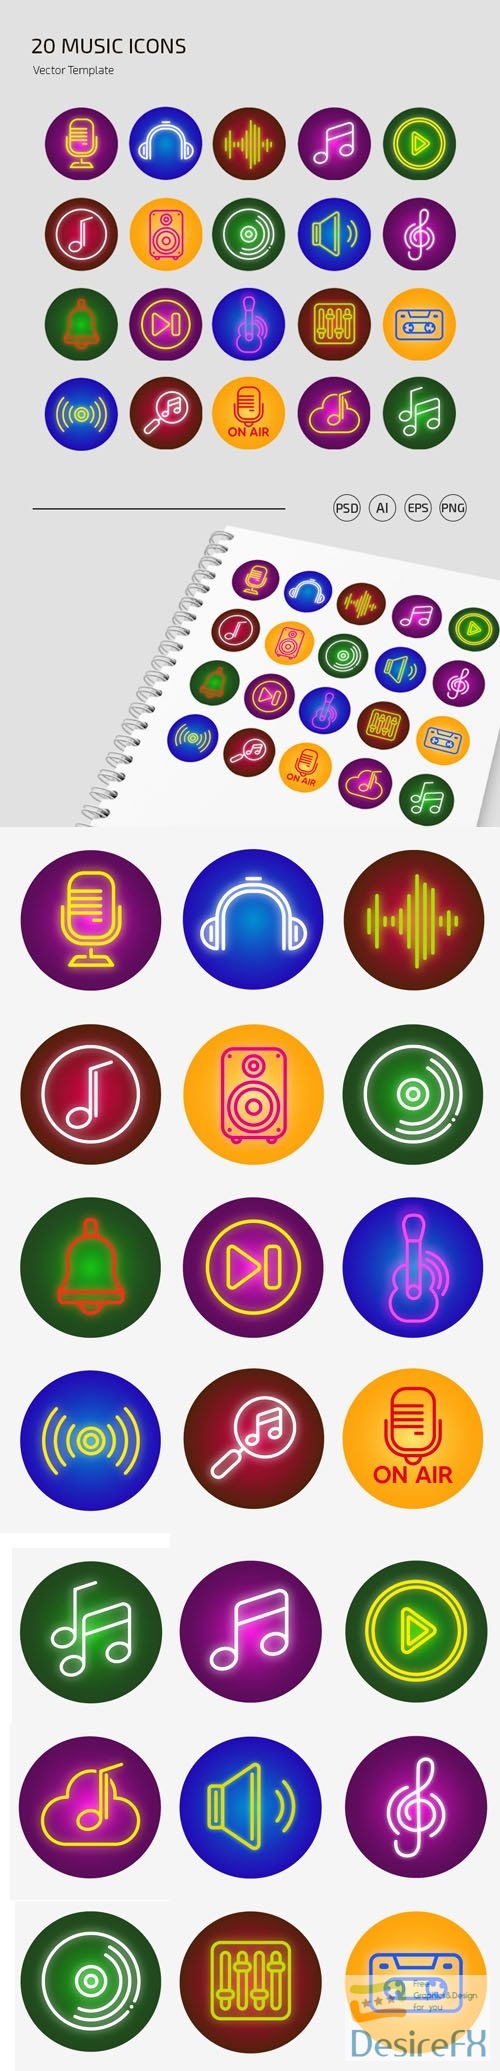 20 Music Icons PSD Templates + Vectors